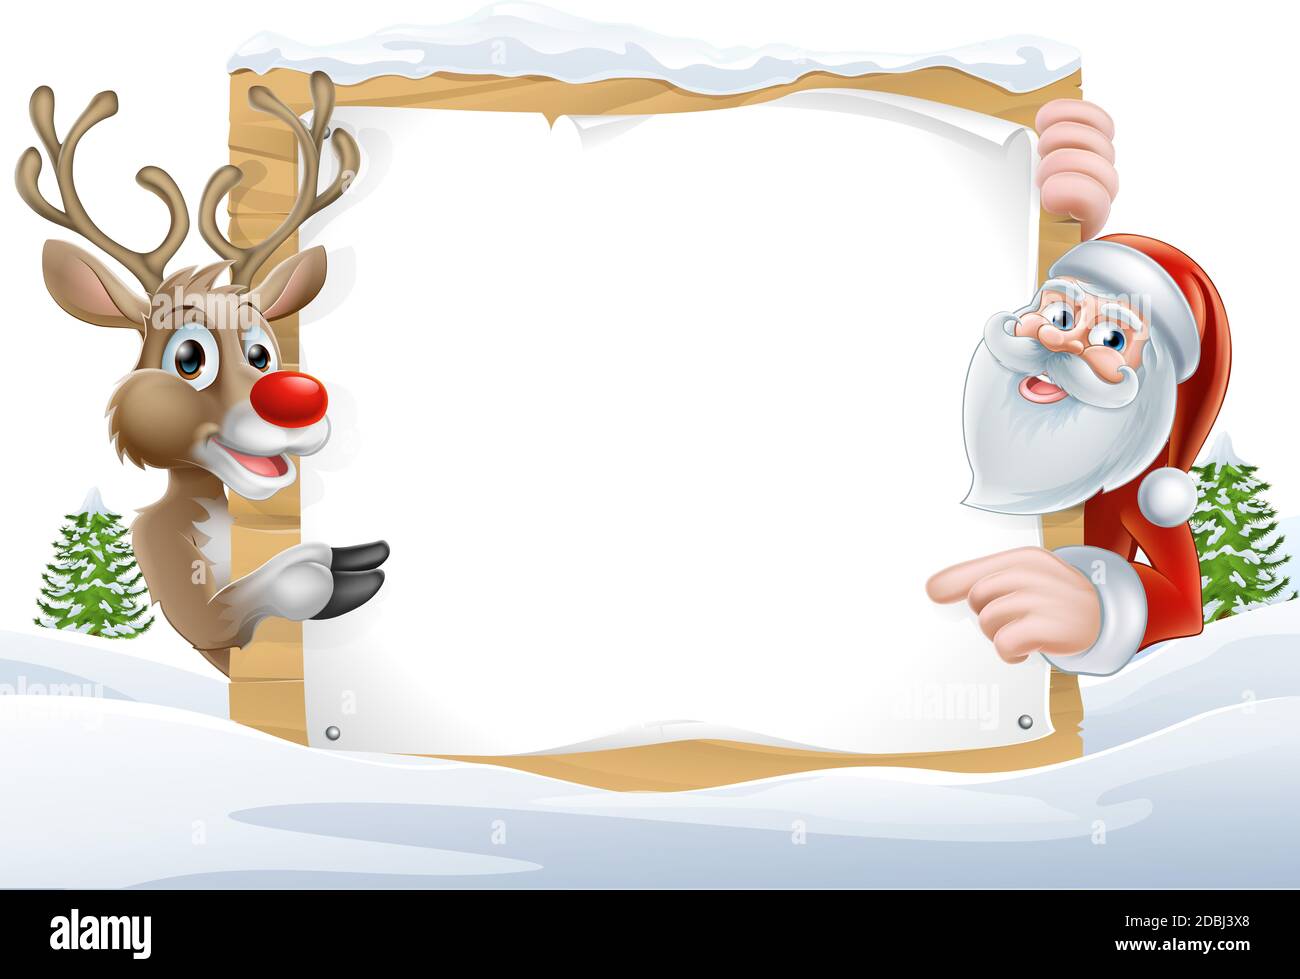 Cartoon Reindeer and Santa pointing at a snow covered sign in a winter landscape Stock Photo